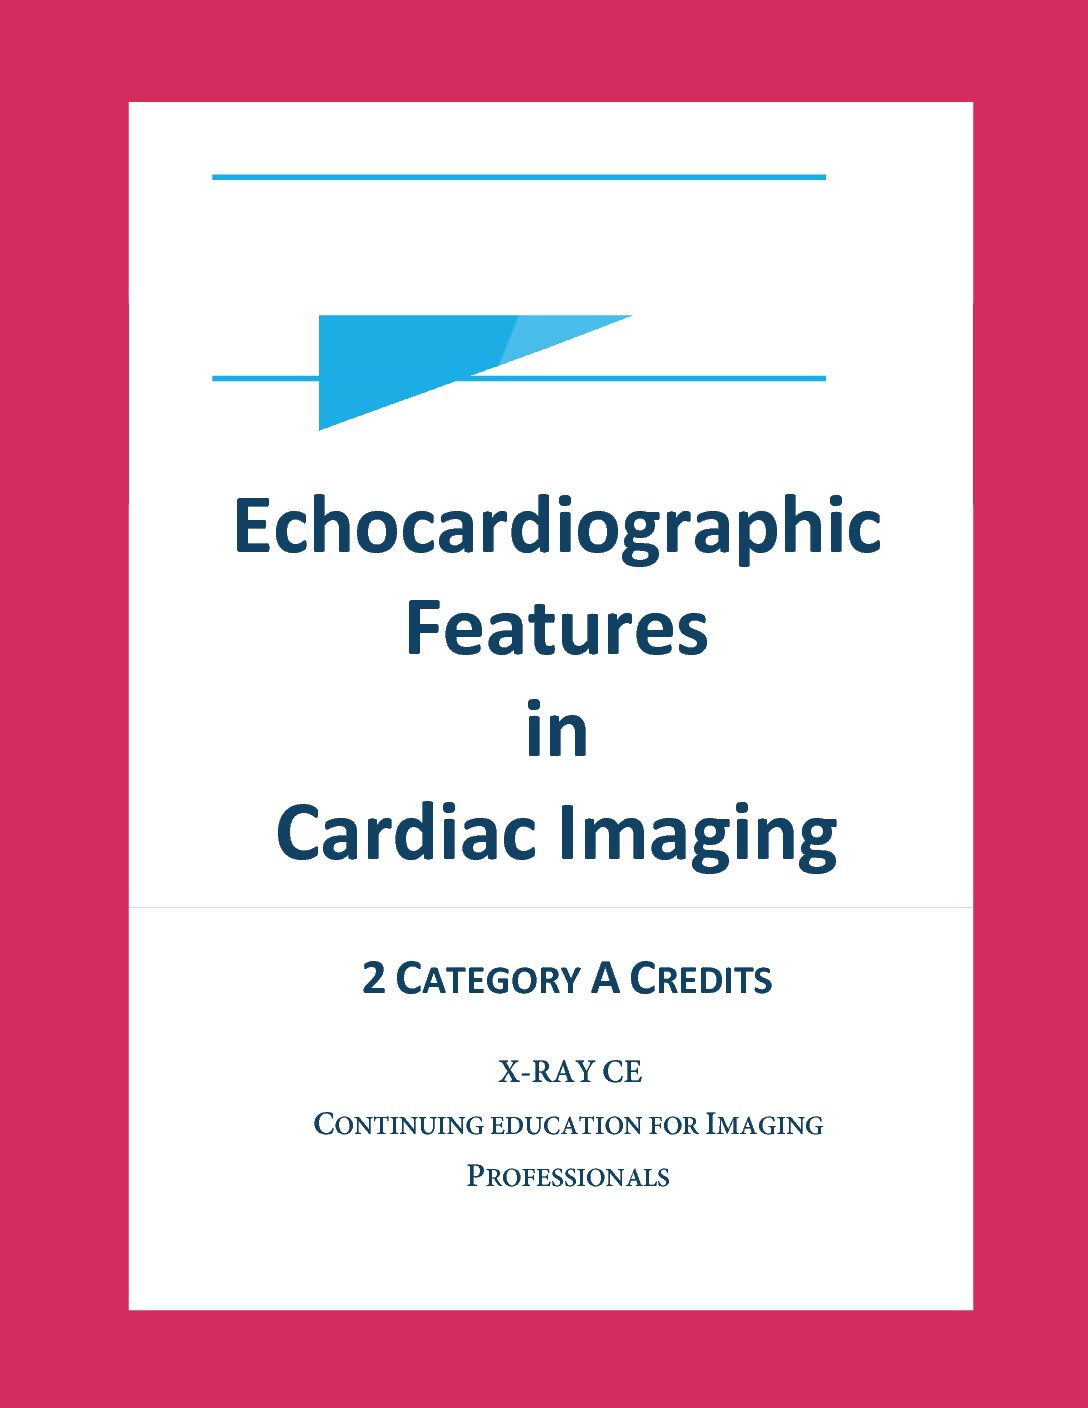 Echocardiographic Features in Cardiac Imaging - X-RAY CE